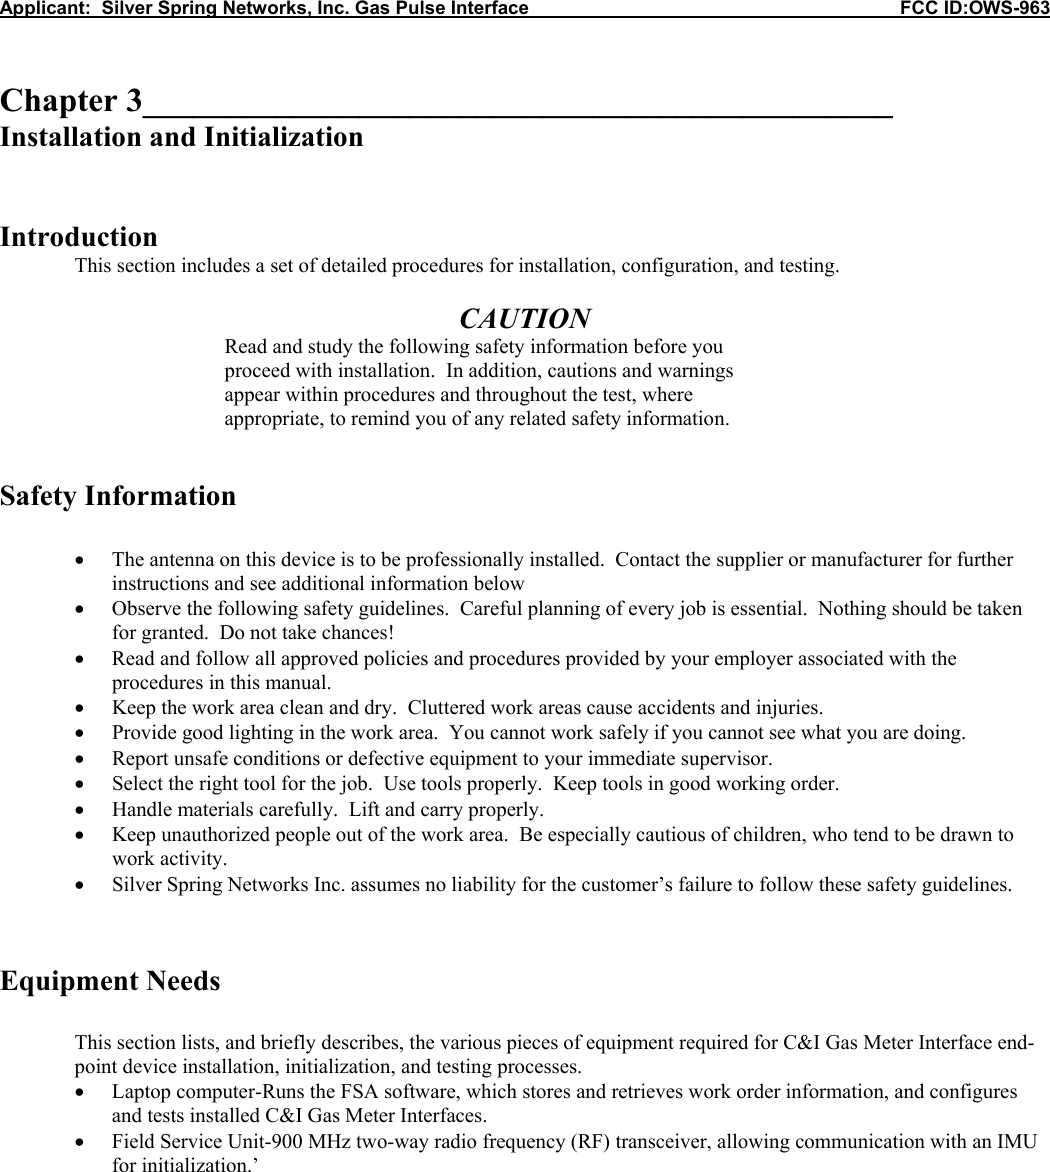 Applicant:  Silver Spring Networks, Inc. Gas Pulse Interface                                                            FCC ID:OWS-963   Chapter 3_____________________________________________ Installation and Initialization   Introduction  This section includes a set of detailed procedures for installation, configuration, and testing.  CAUTION Read and study the following safety information before you proceed with installation.  In addition, cautions and warnings appear within procedures and throughout the test, where appropriate, to remind you of any related safety information.   Safety Information  • The antenna on this device is to be professionally installed.  Contact the supplier or manufacturer for further instructions and see additional information below • Observe the following safety guidelines.  Careful planning of every job is essential.  Nothing should be taken for granted.  Do not take chances! • Read and follow all approved policies and procedures provided by your employer associated with the procedures in this manual. • Keep the work area clean and dry.  Cluttered work areas cause accidents and injuries. • Provide good lighting in the work area.  You cannot work safely if you cannot see what you are doing. • Report unsafe conditions or defective equipment to your immediate supervisor. • Select the right tool for the job.  Use tools properly.  Keep tools in good working order. • Handle materials carefully.  Lift and carry properly. • Keep unauthorized people out of the work area.  Be especially cautious of children, who tend to be drawn to work activity. • Silver Spring Networks Inc. assumes no liability for the customer’s failure to follow these safety guidelines.   Equipment Needs  This section lists, and briefly describes, the various pieces of equipment required for C&amp;I Gas Meter Interface end-point device installation, initialization, and testing processes. • Laptop computer-Runs the FSA software, which stores and retrieves work order information, and configures and tests installed C&amp;I Gas Meter Interfaces. • Field Service Unit-900 MHz two-way radio frequency (RF) transceiver, allowing communication with an IMU for initialization.’      